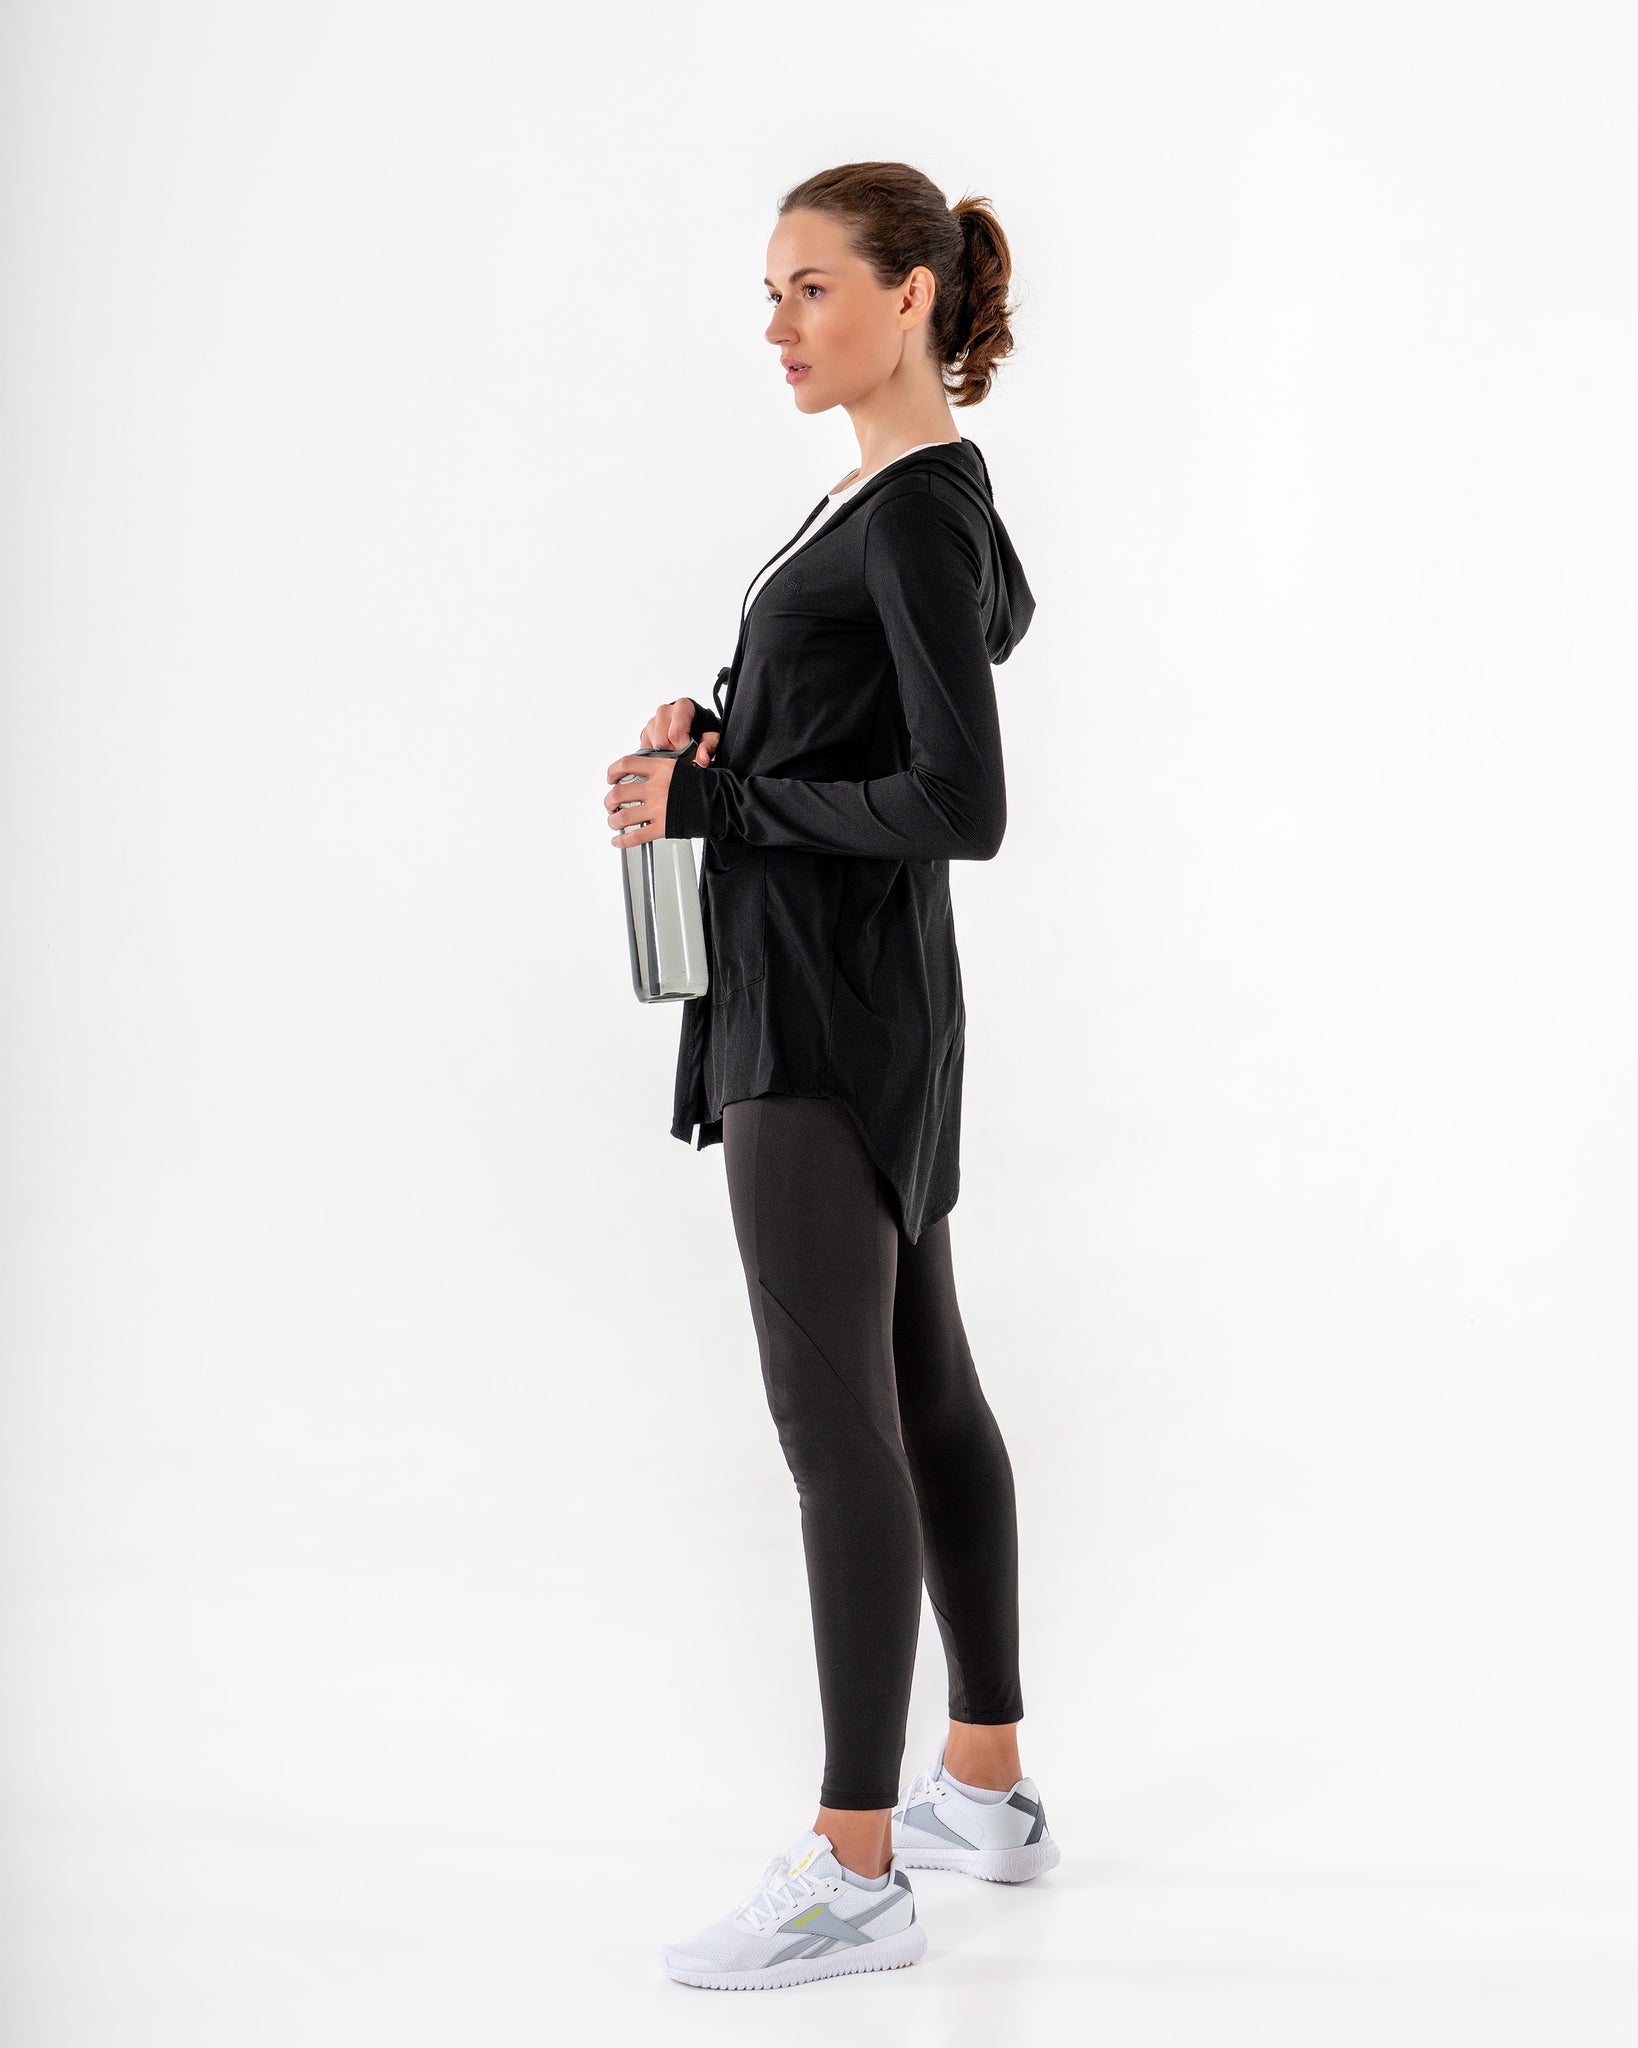 Move It Cardigan in black by Veil Garments. Modest activewear collection.